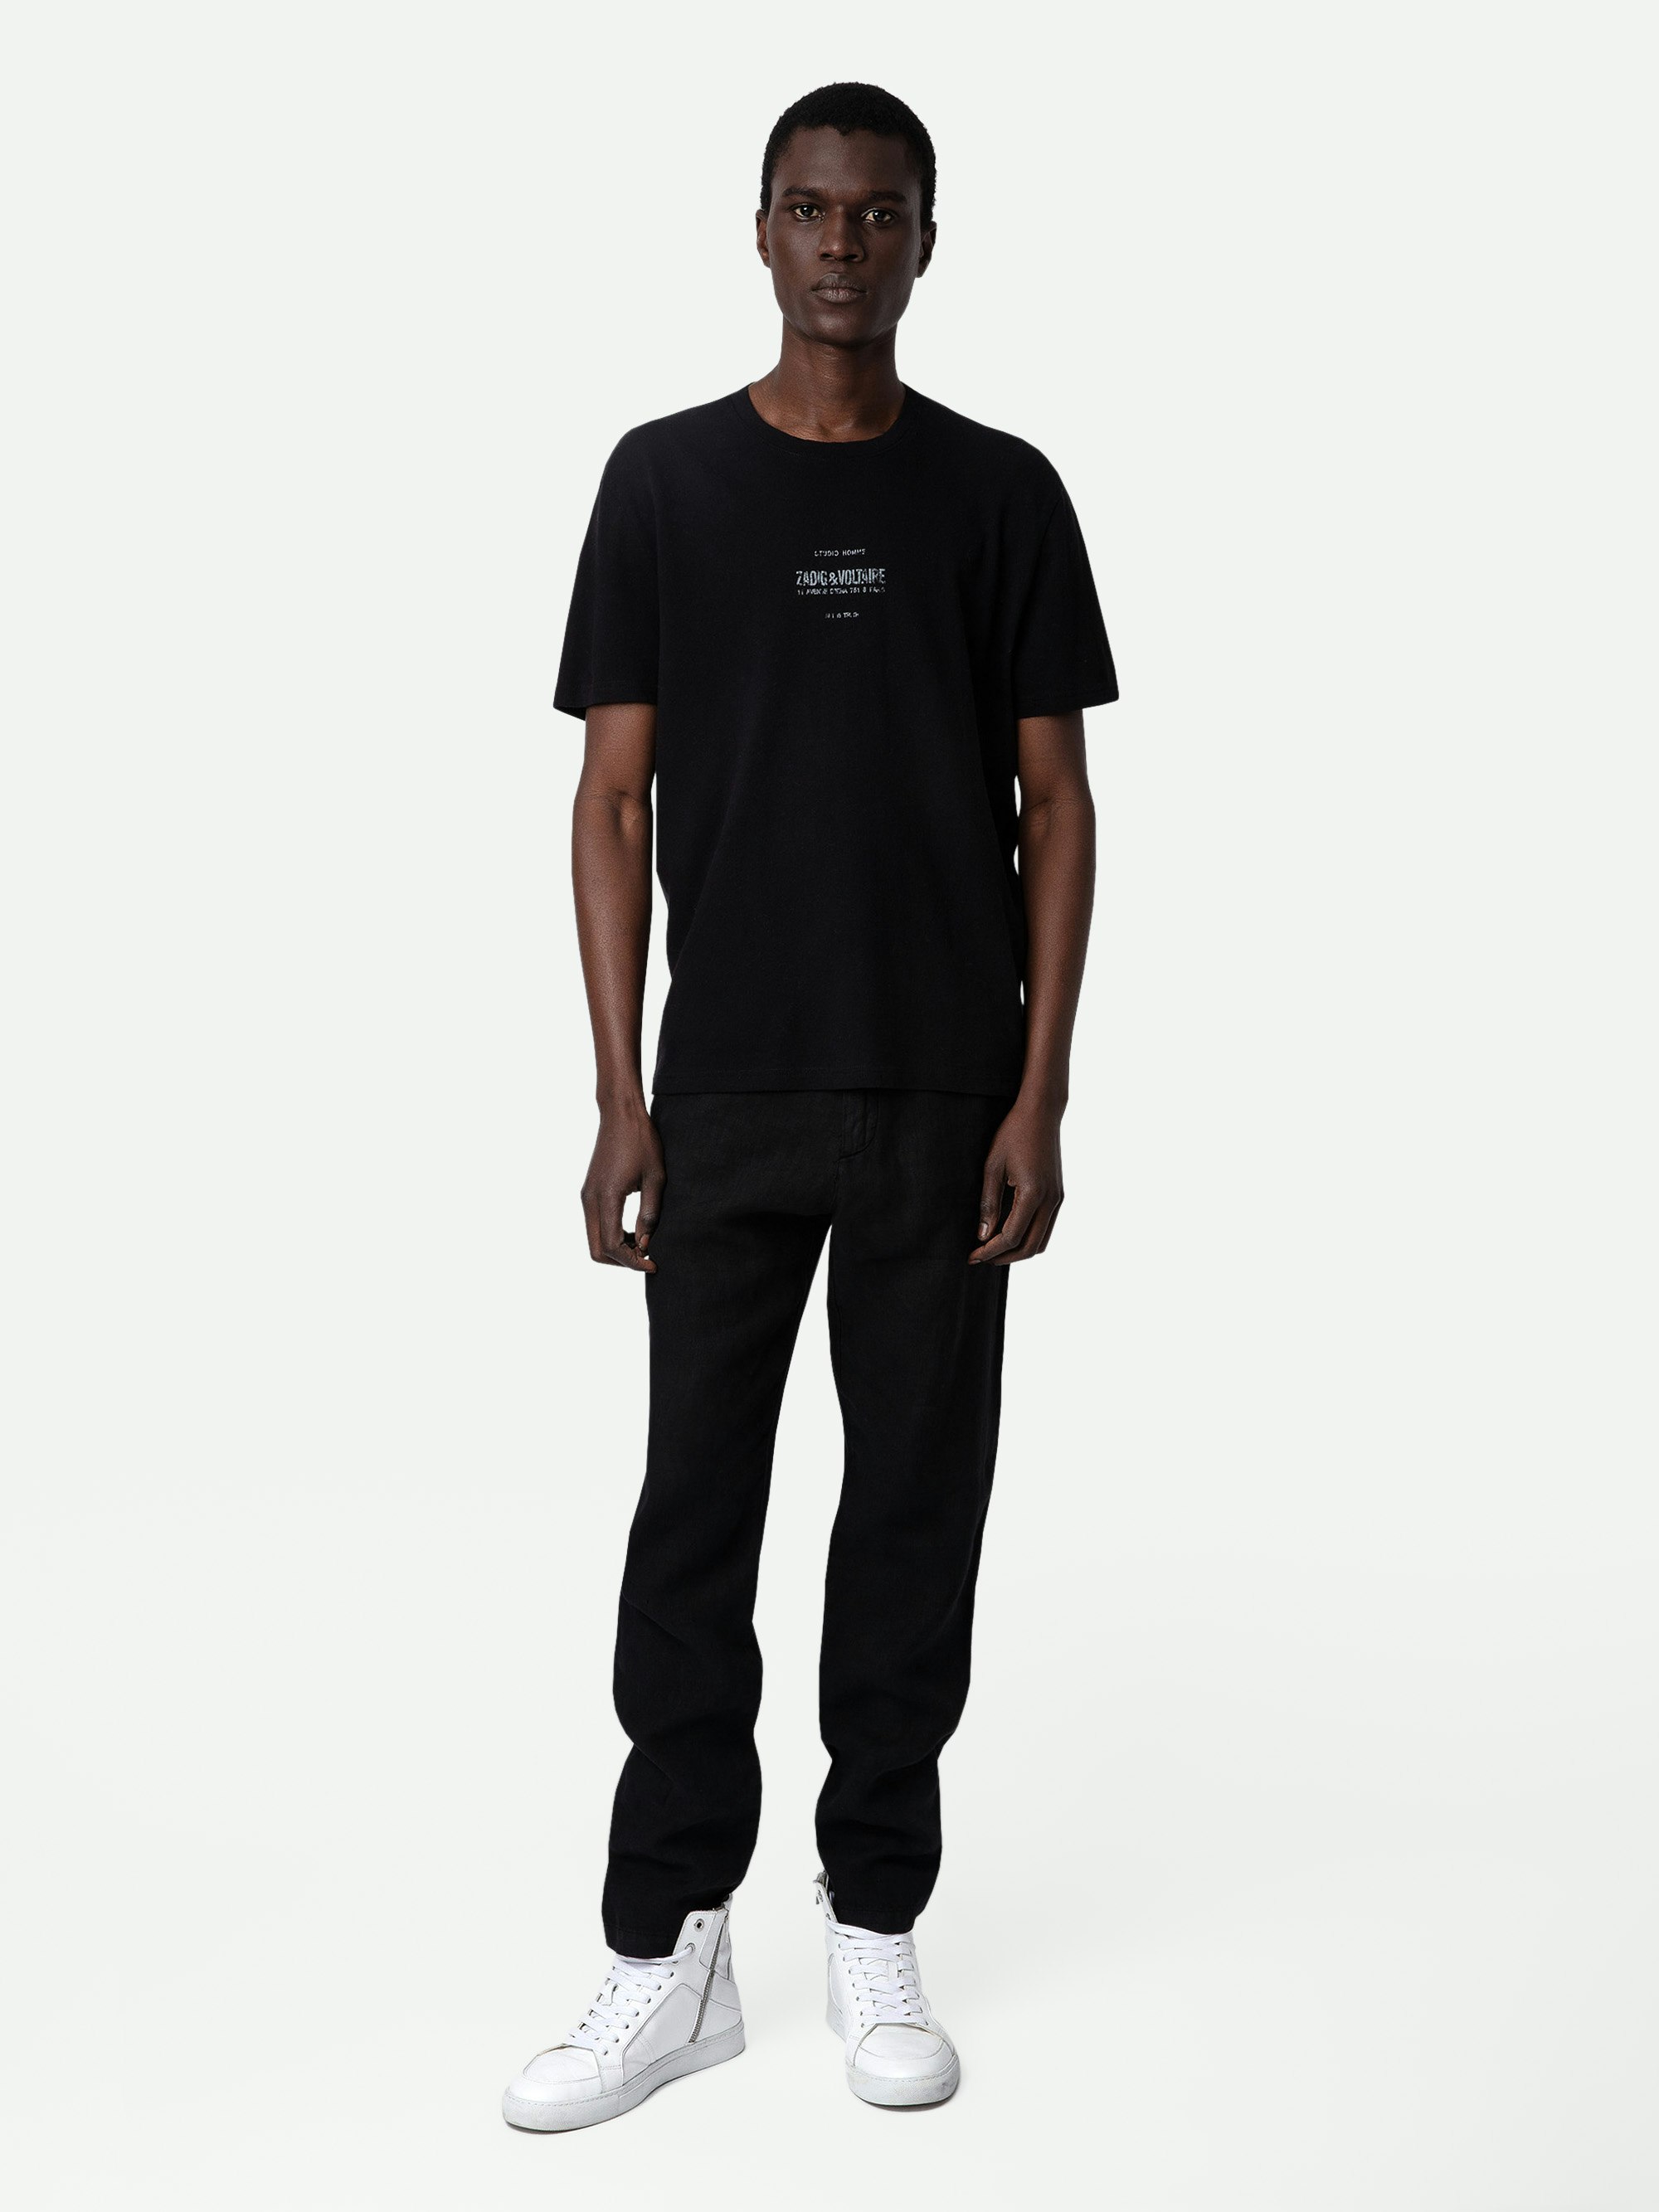 Jetty T-shirt - Black washed linen short-sleeved T-shirt with printed Studio Homme insignia.